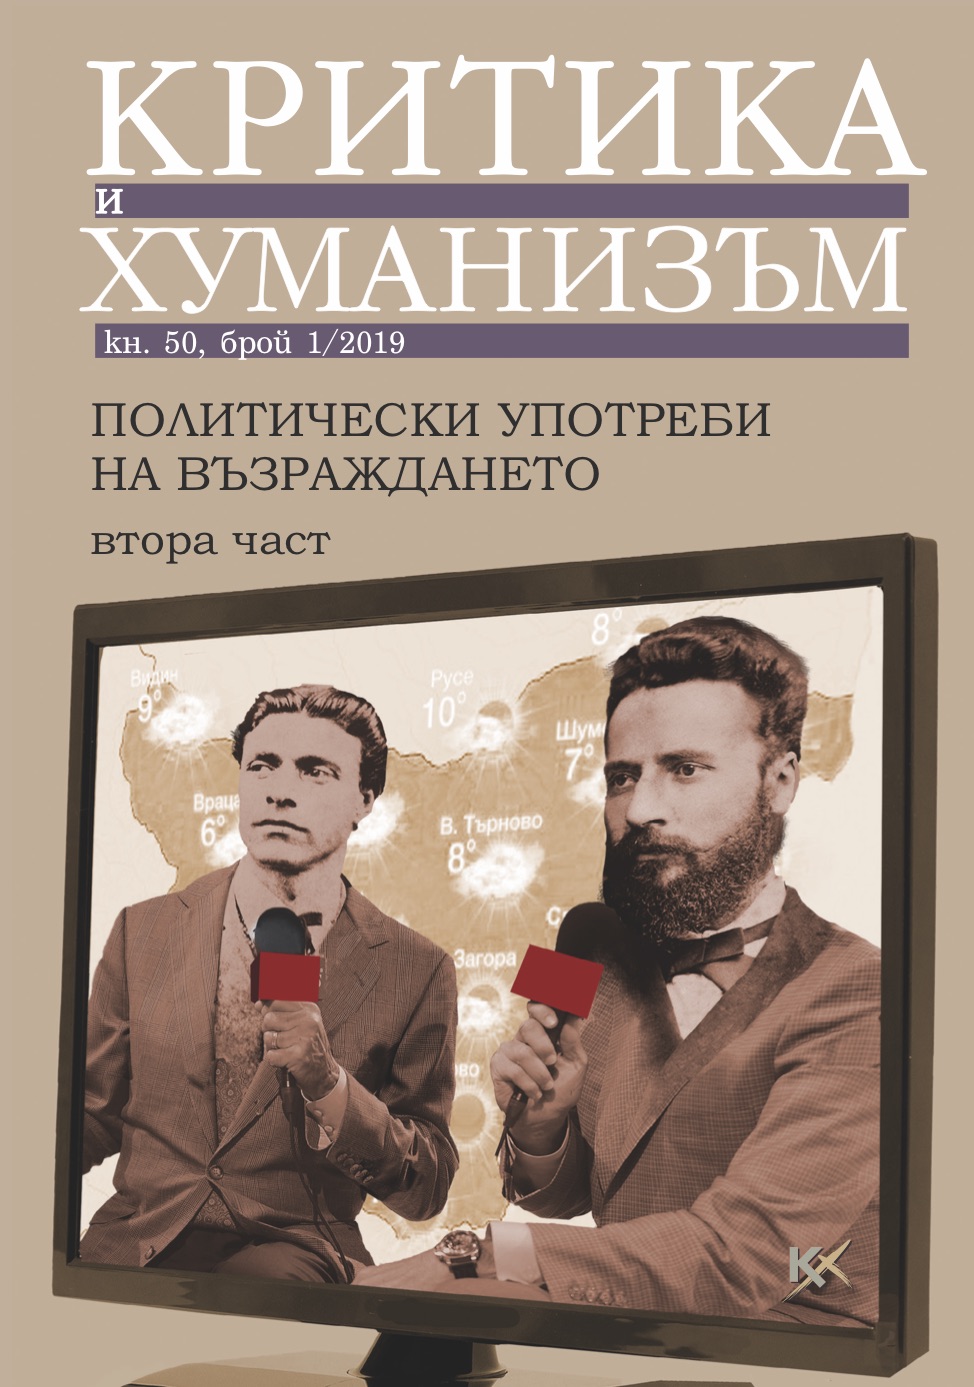 Botev in the Missul’s Circle Iconography Cover Image